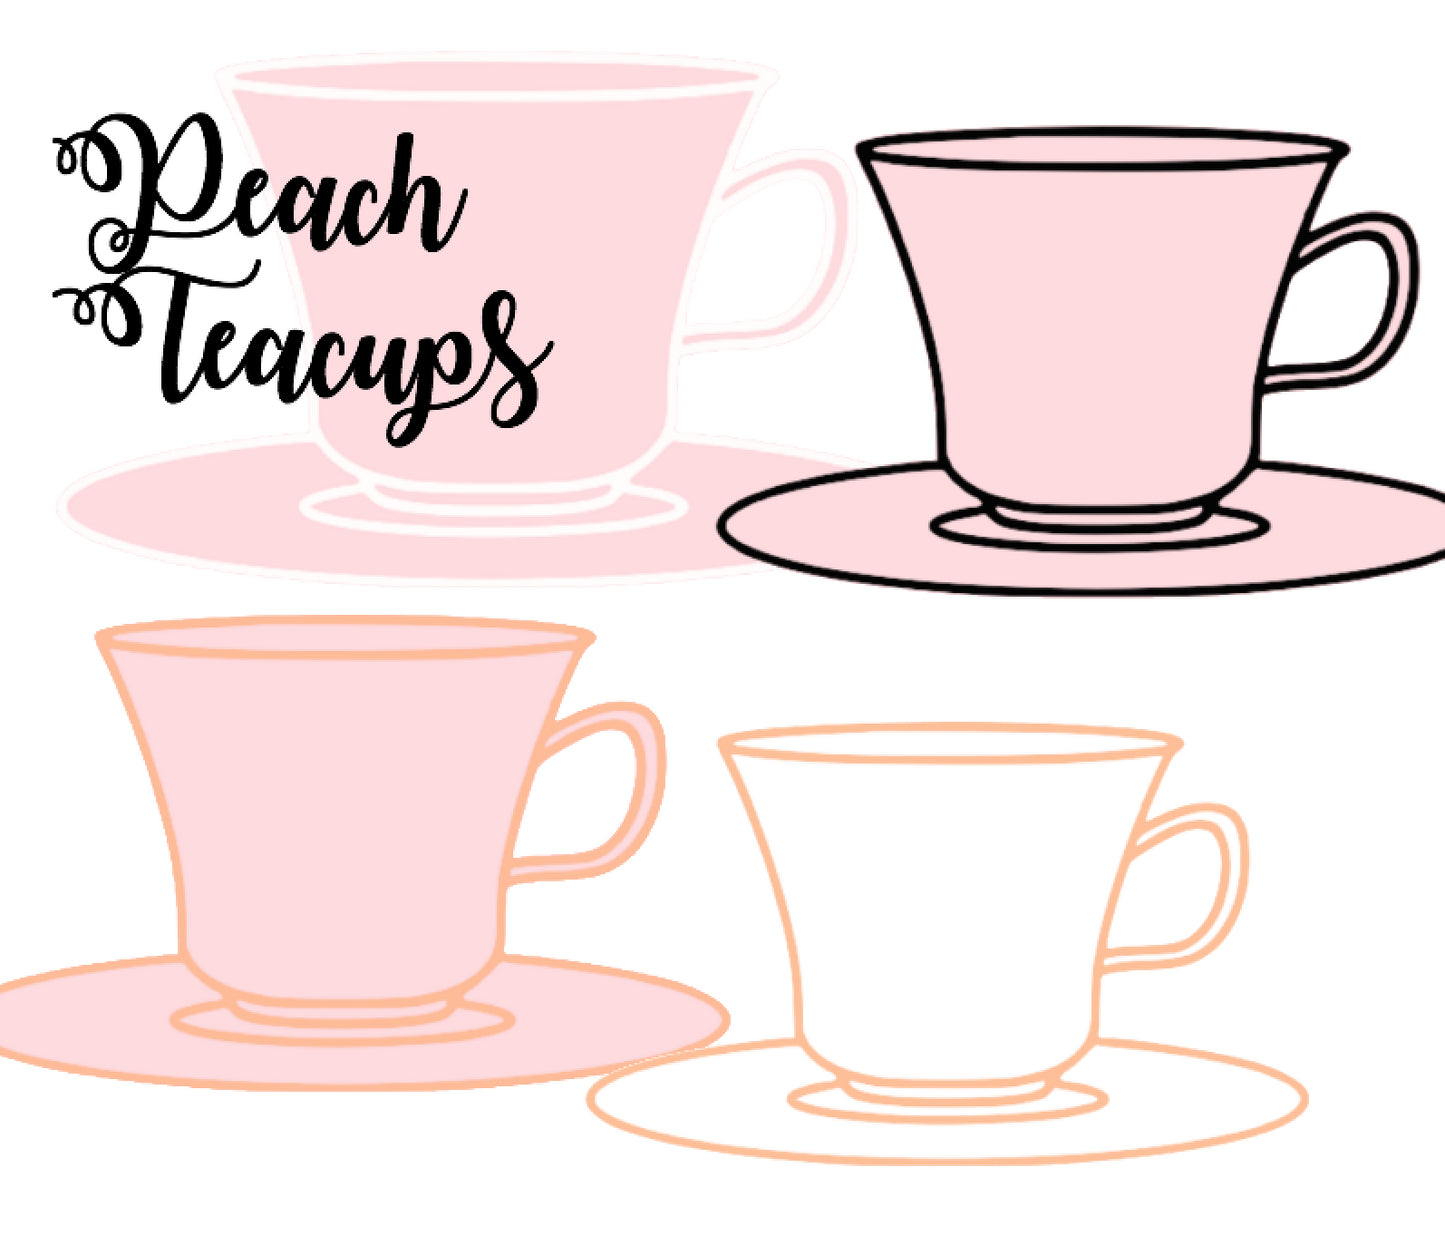 4 Peach Teacups 4 separate images each different